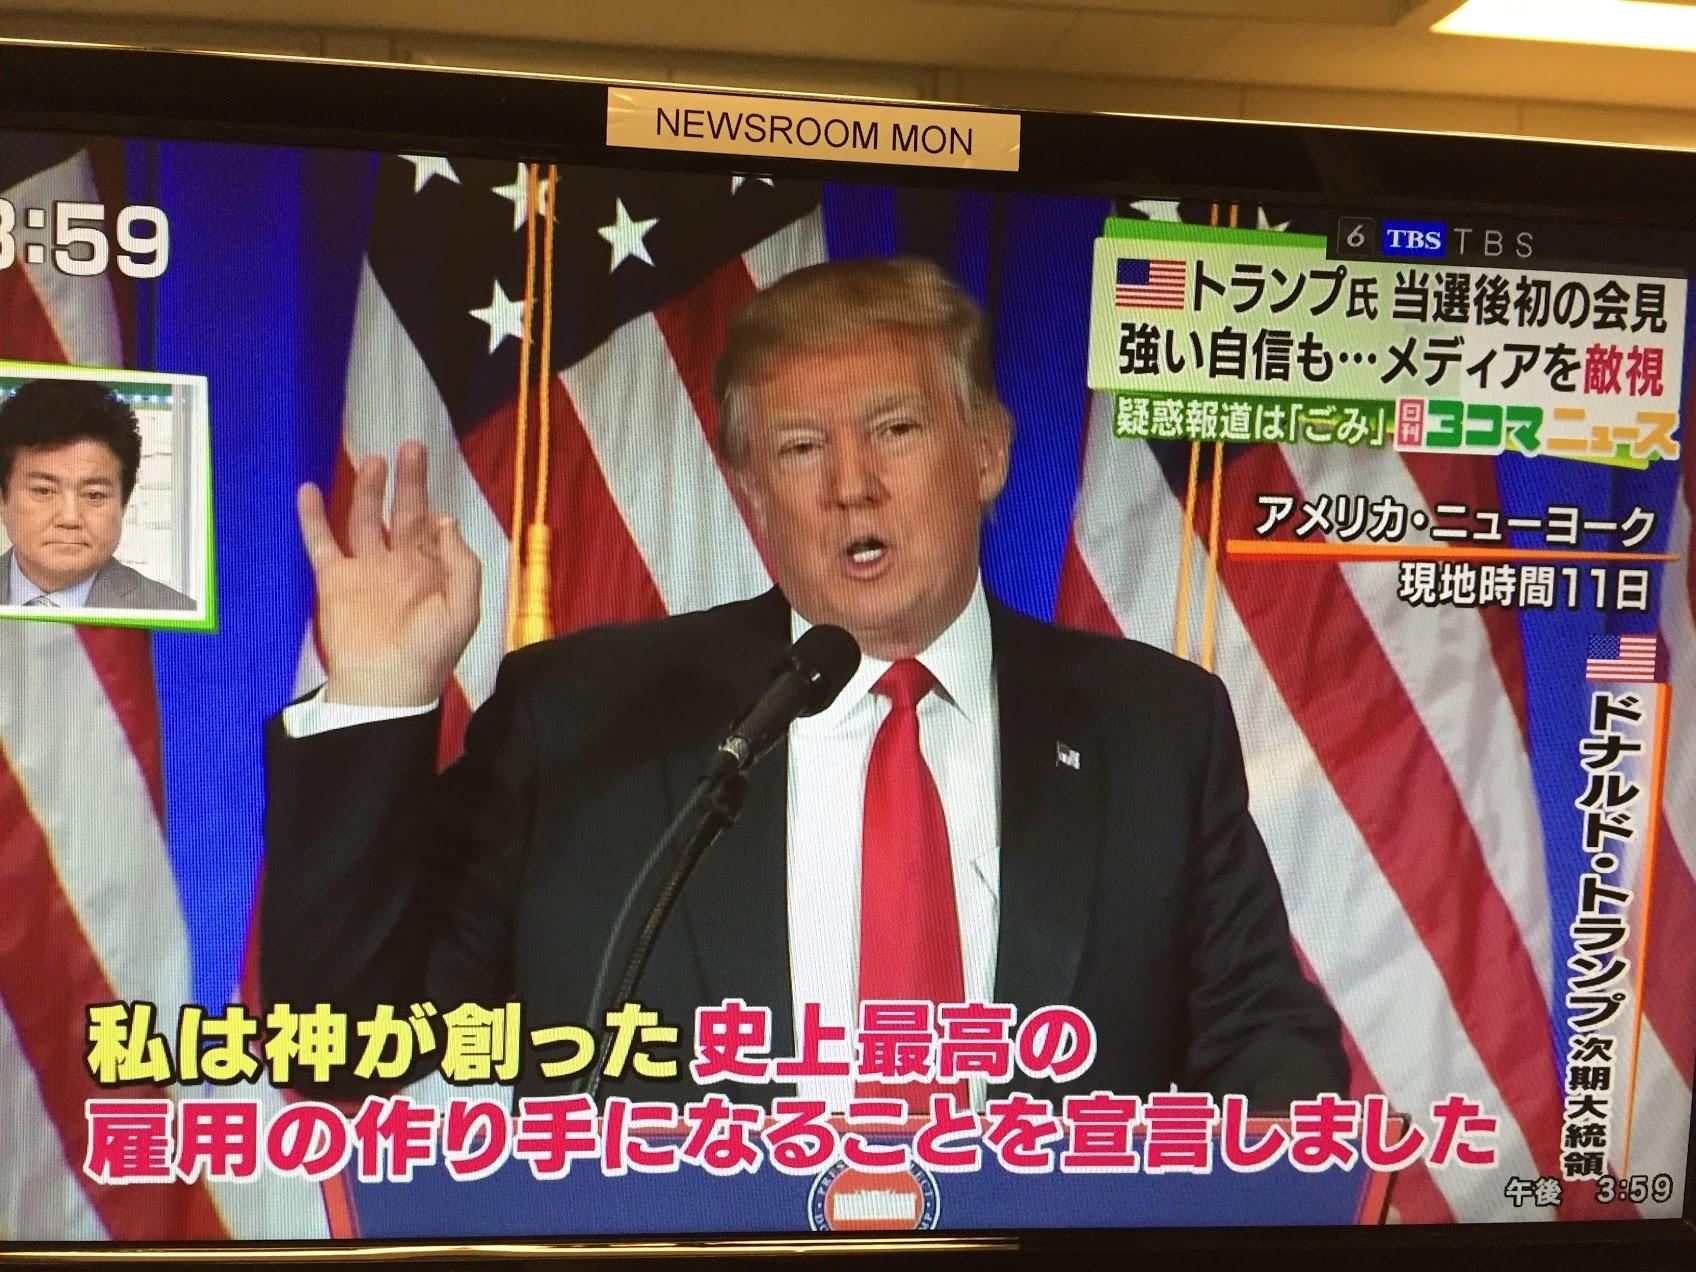  Trump press conference covered on Japanese TV 